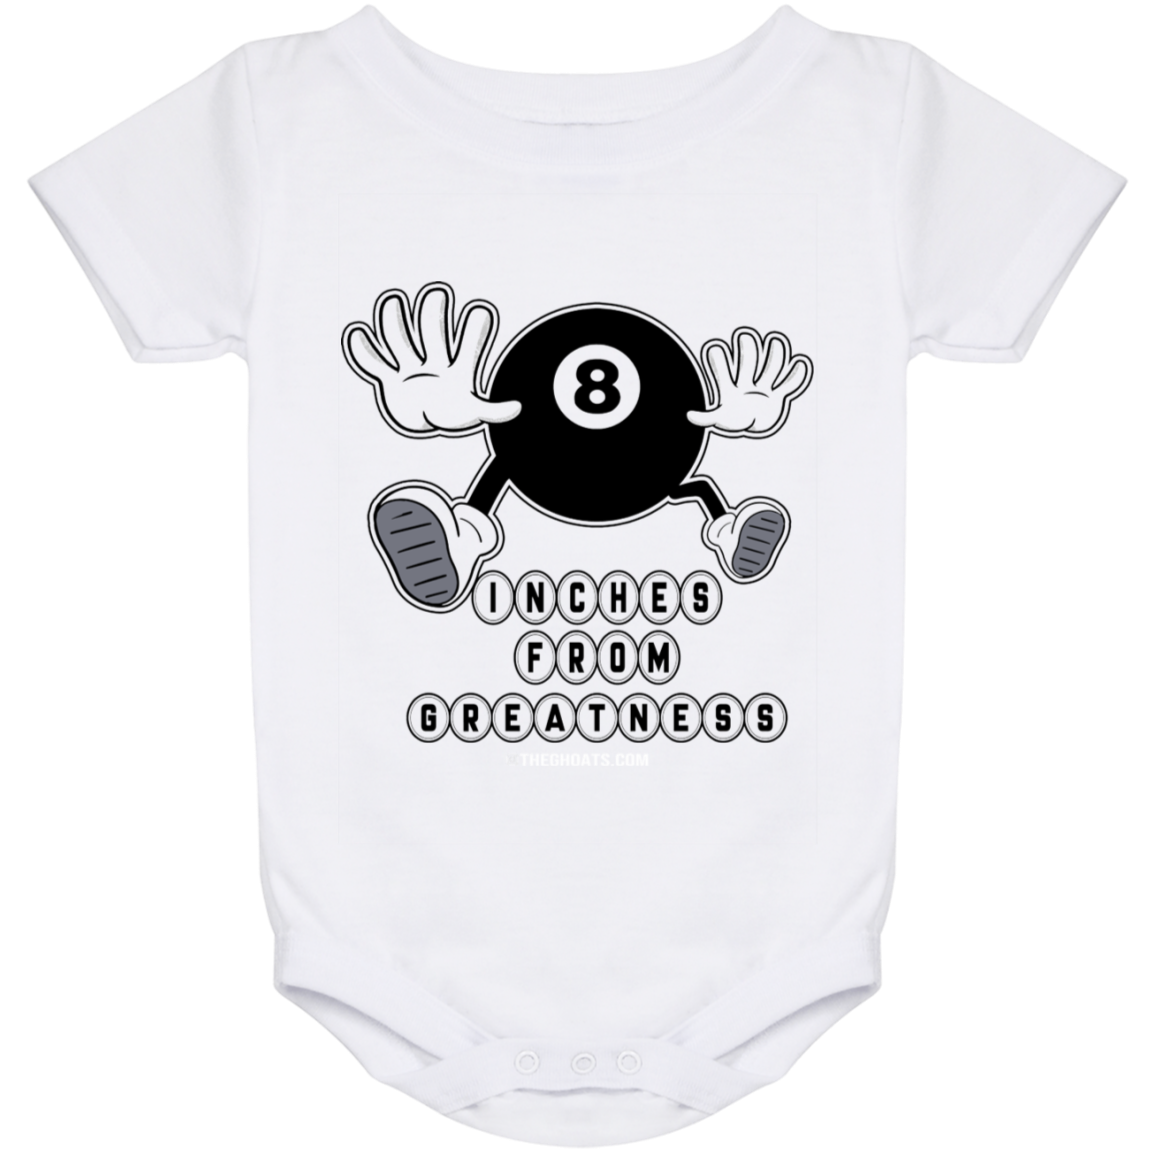 The GHOATS Custom Design #17. Inches From Greatness. Baby Onesie 24 Month